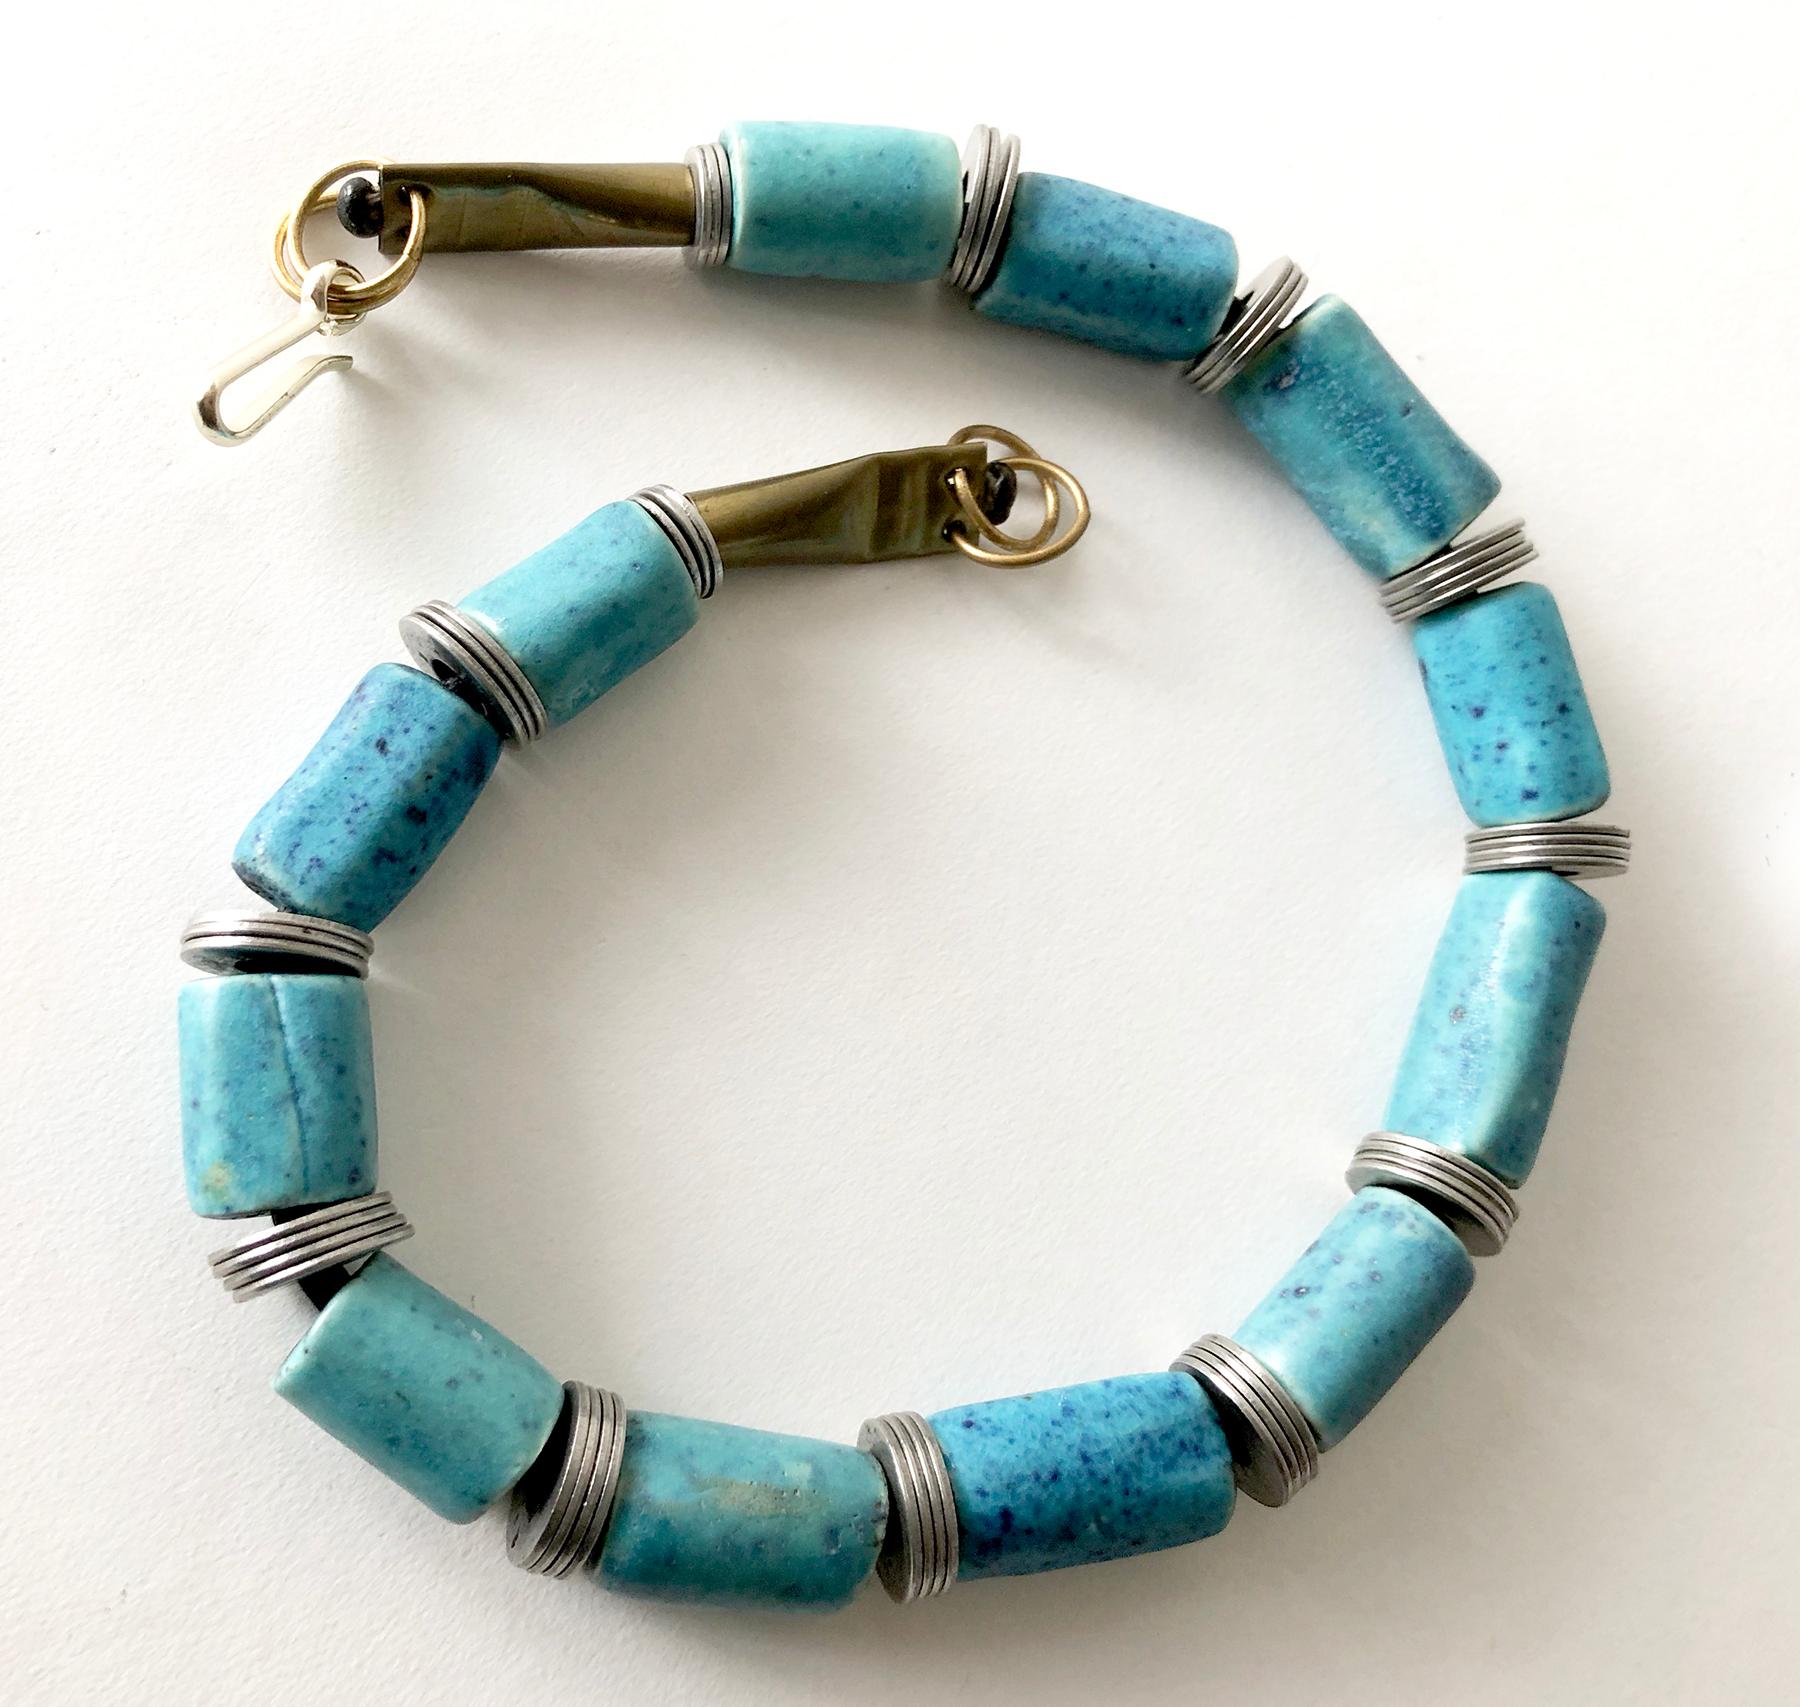 Handmade necklace of twelve cylindrical mottled turquoise beads separated by steel washers, created by Doyle Lane of Los Angeles, California.  Necklace measures 20